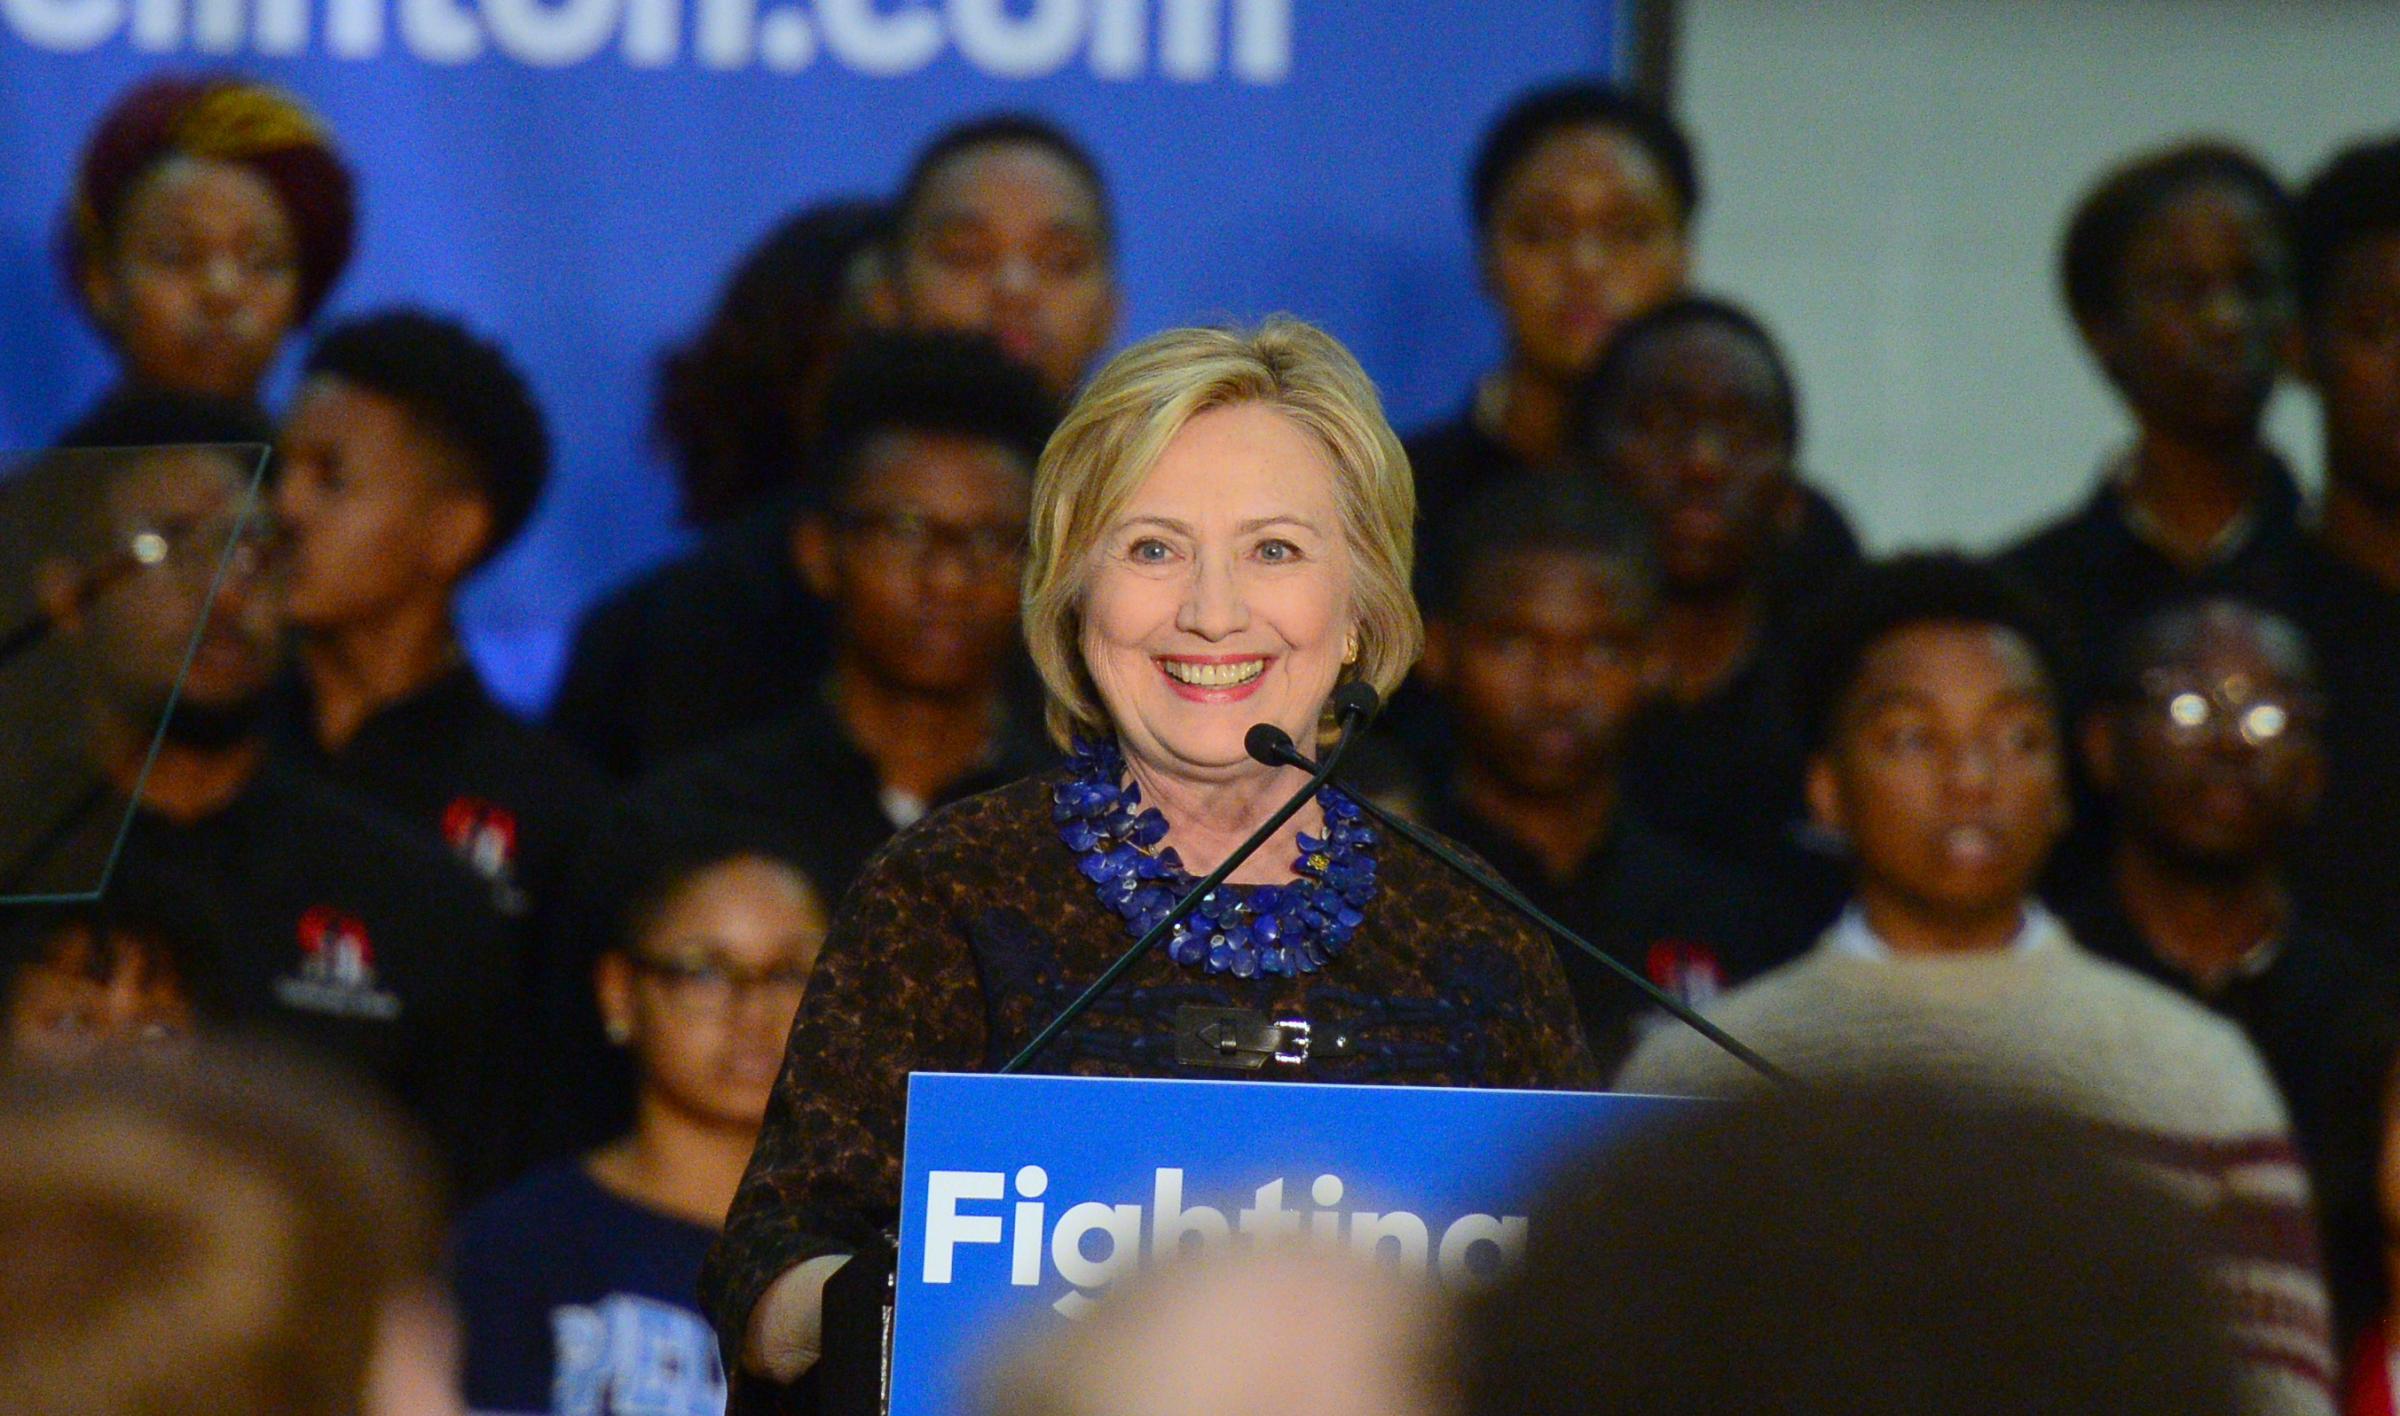 African Americans For Hillary Grassroots Organizing Meeting With Hillary Clinton